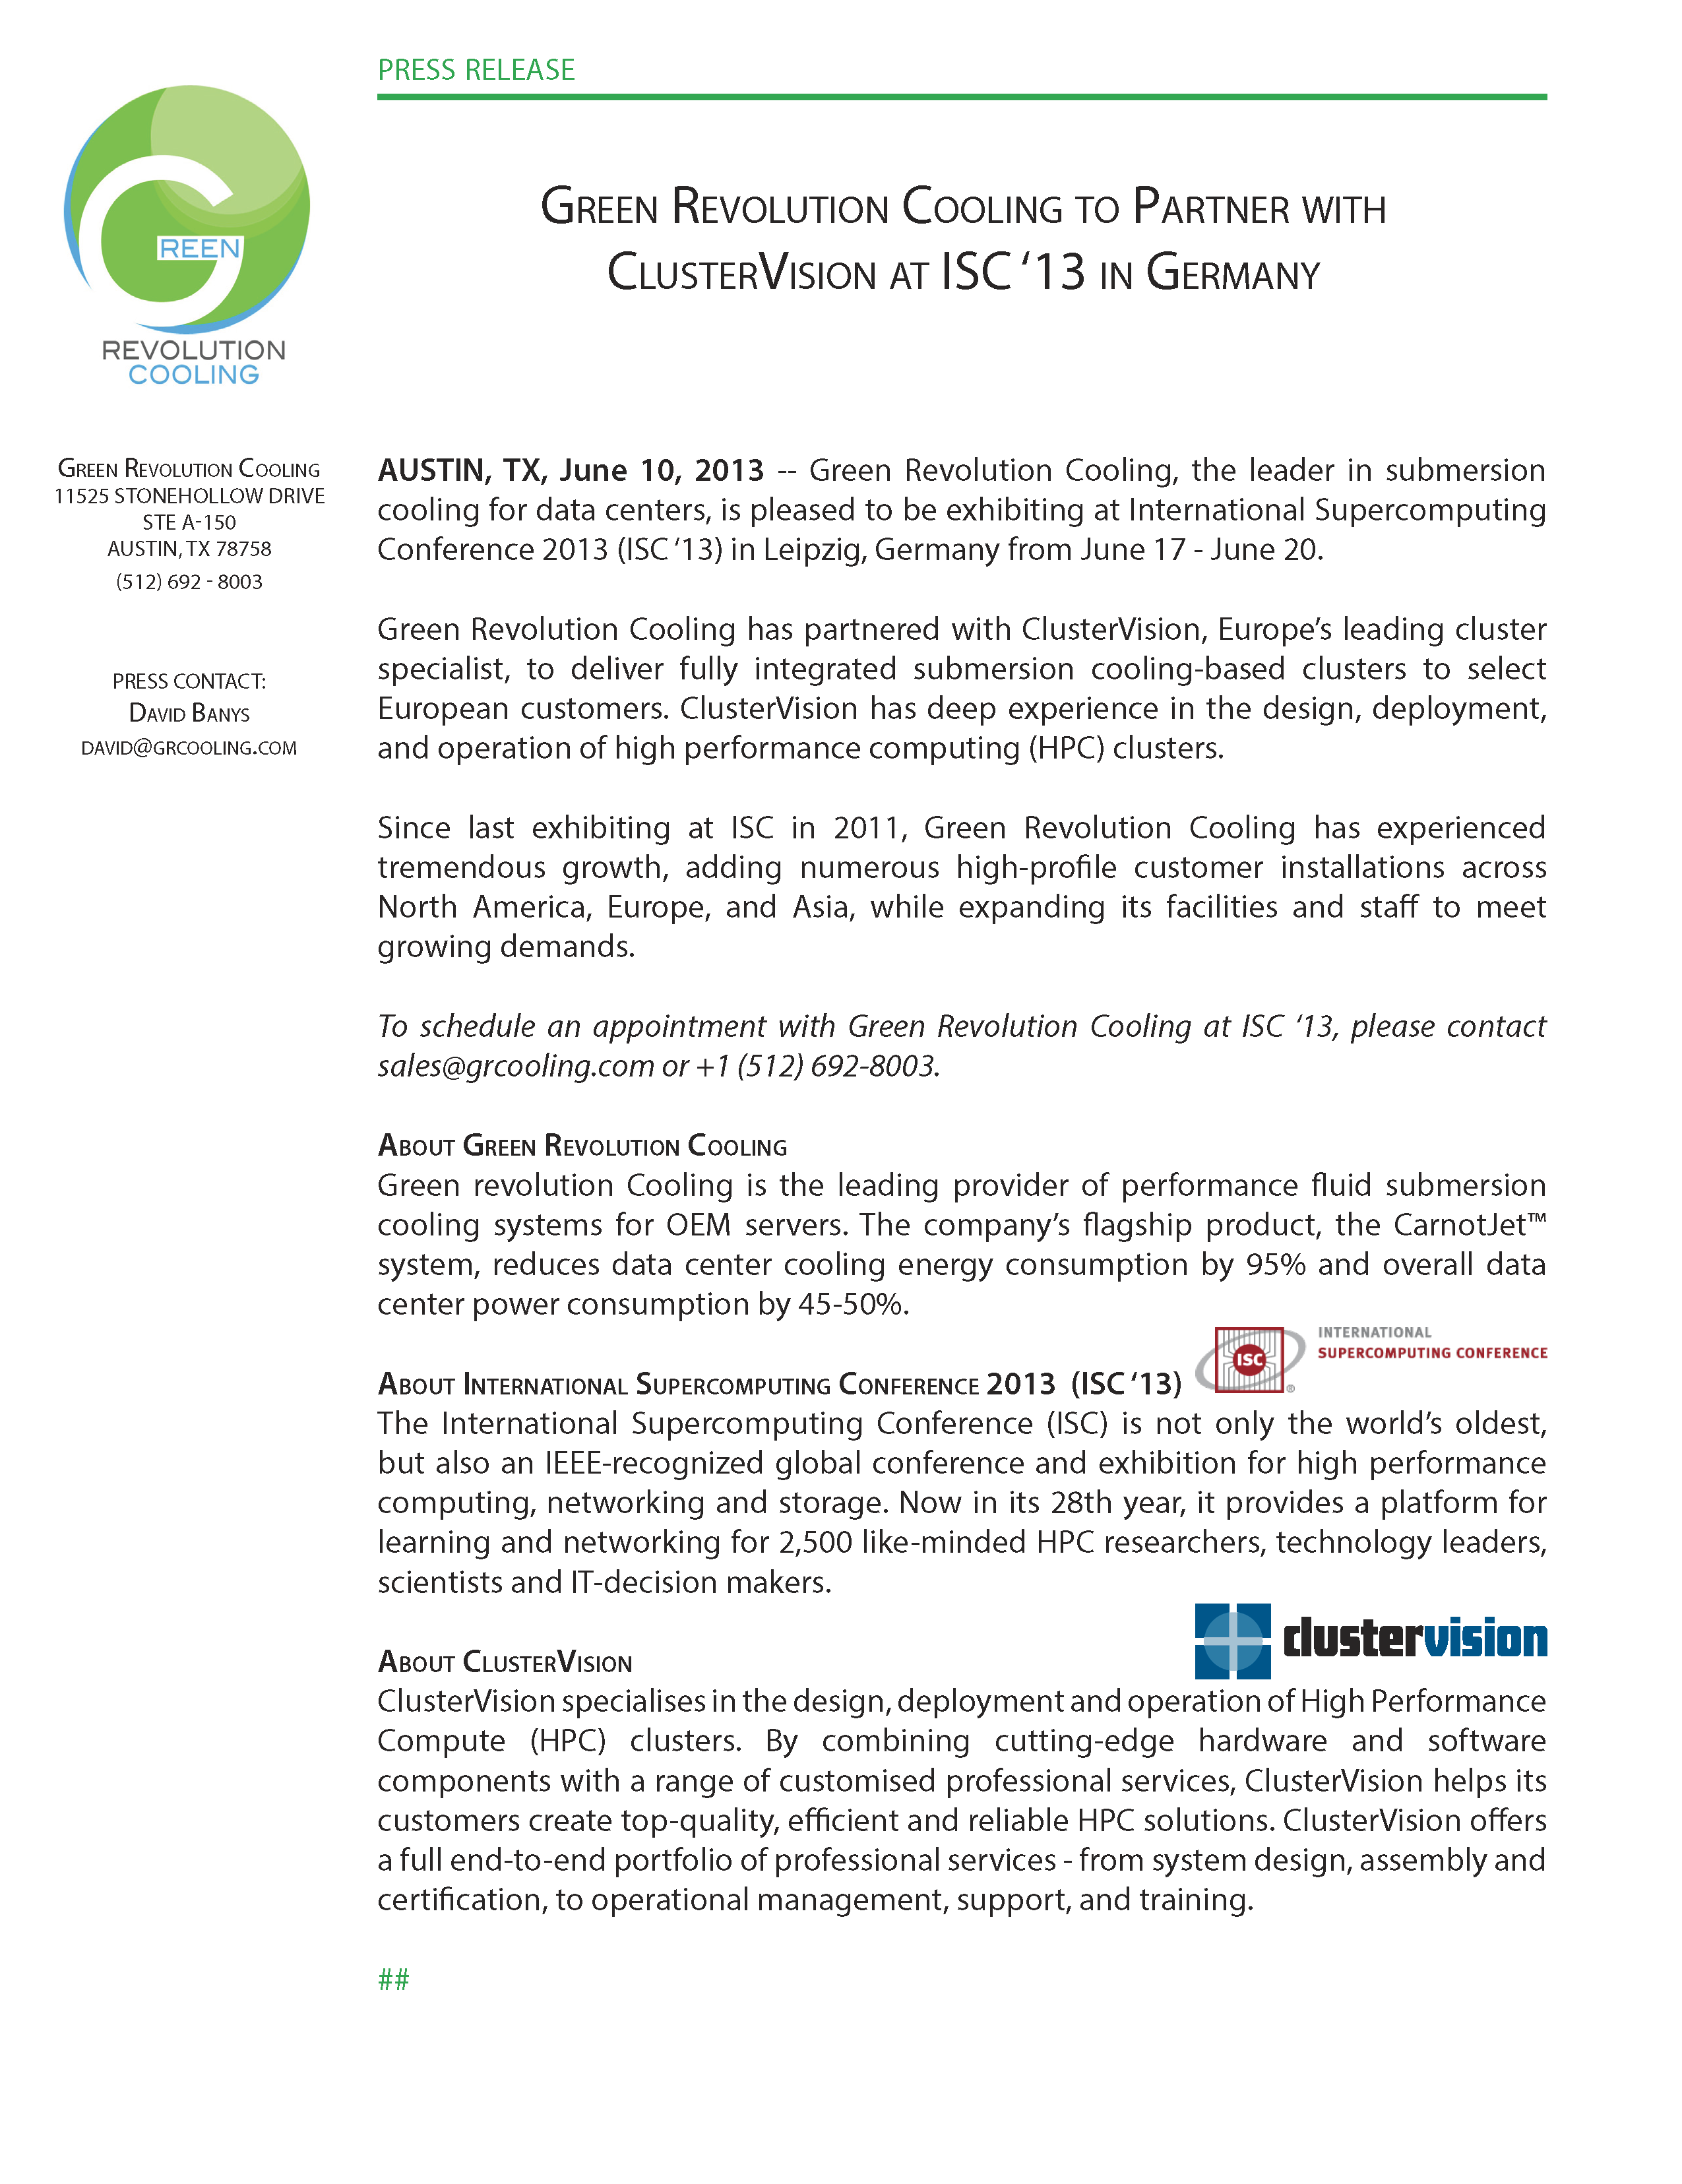 Green Revolution Cooling to Partner with ClusterVision at ISC ’13